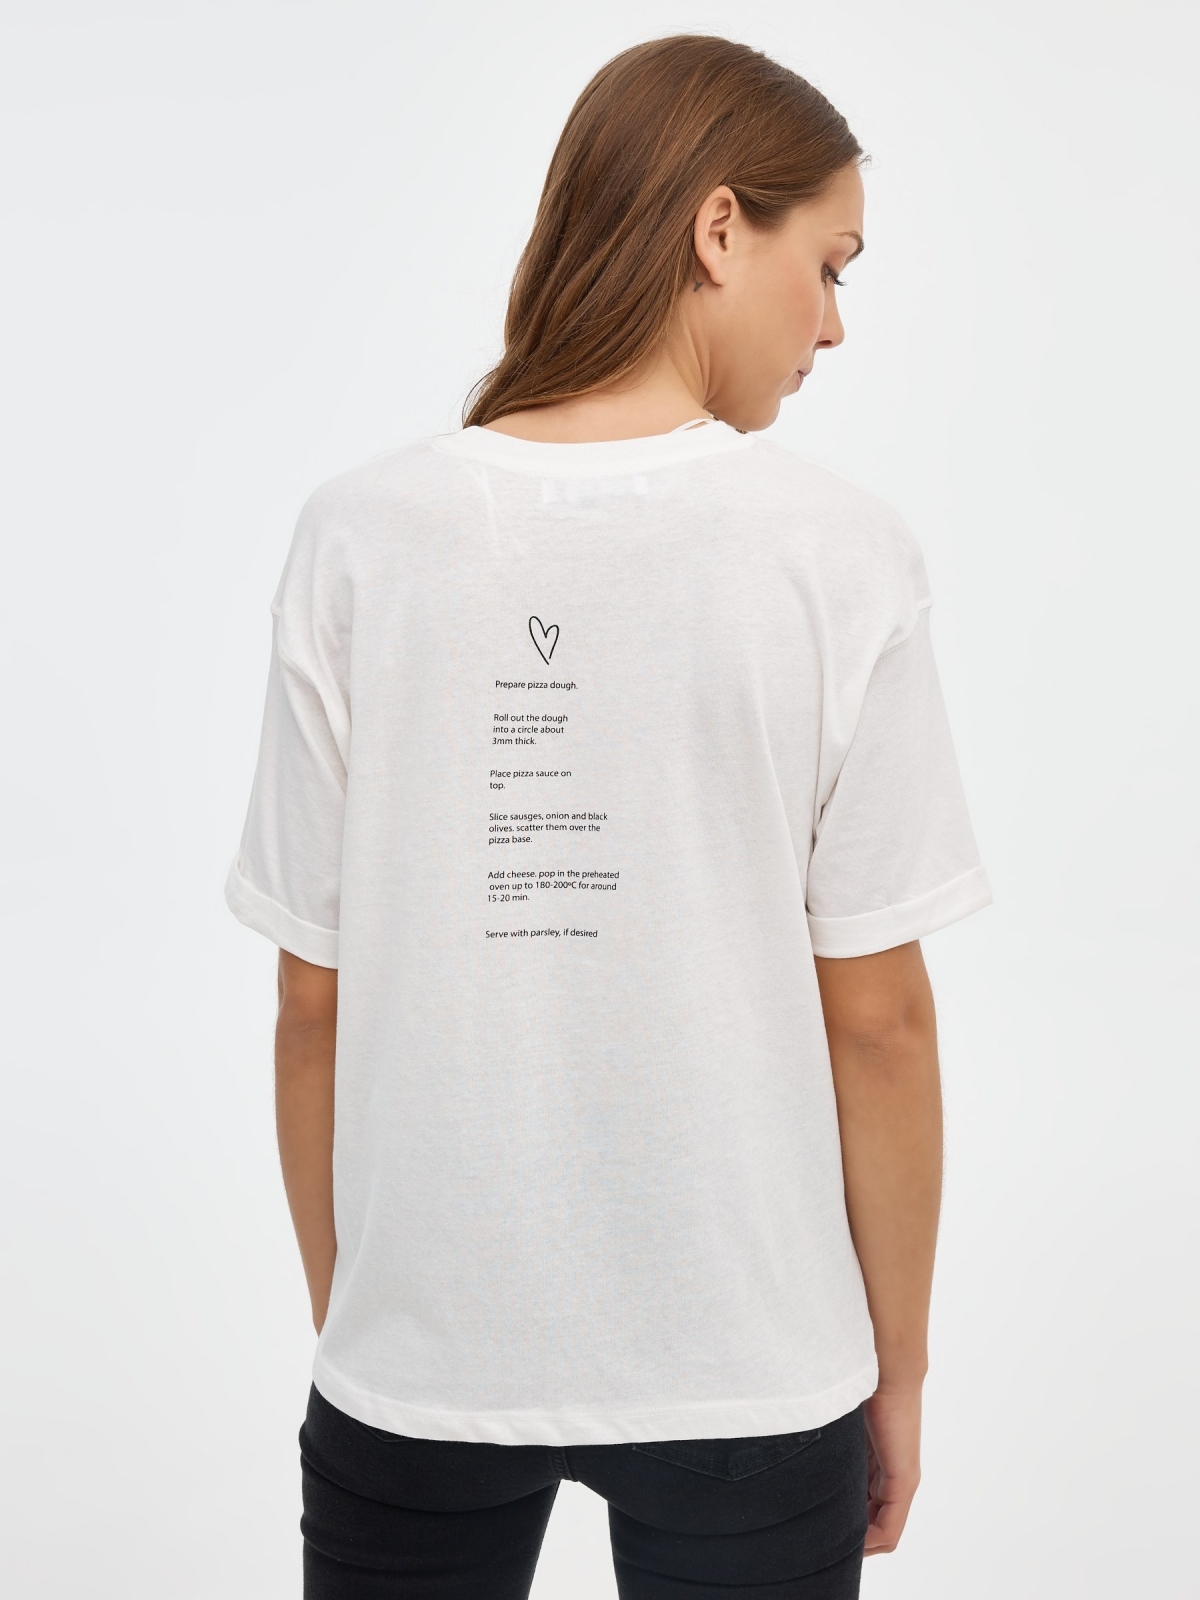 Hot Pizza T-shirt off white middle back view